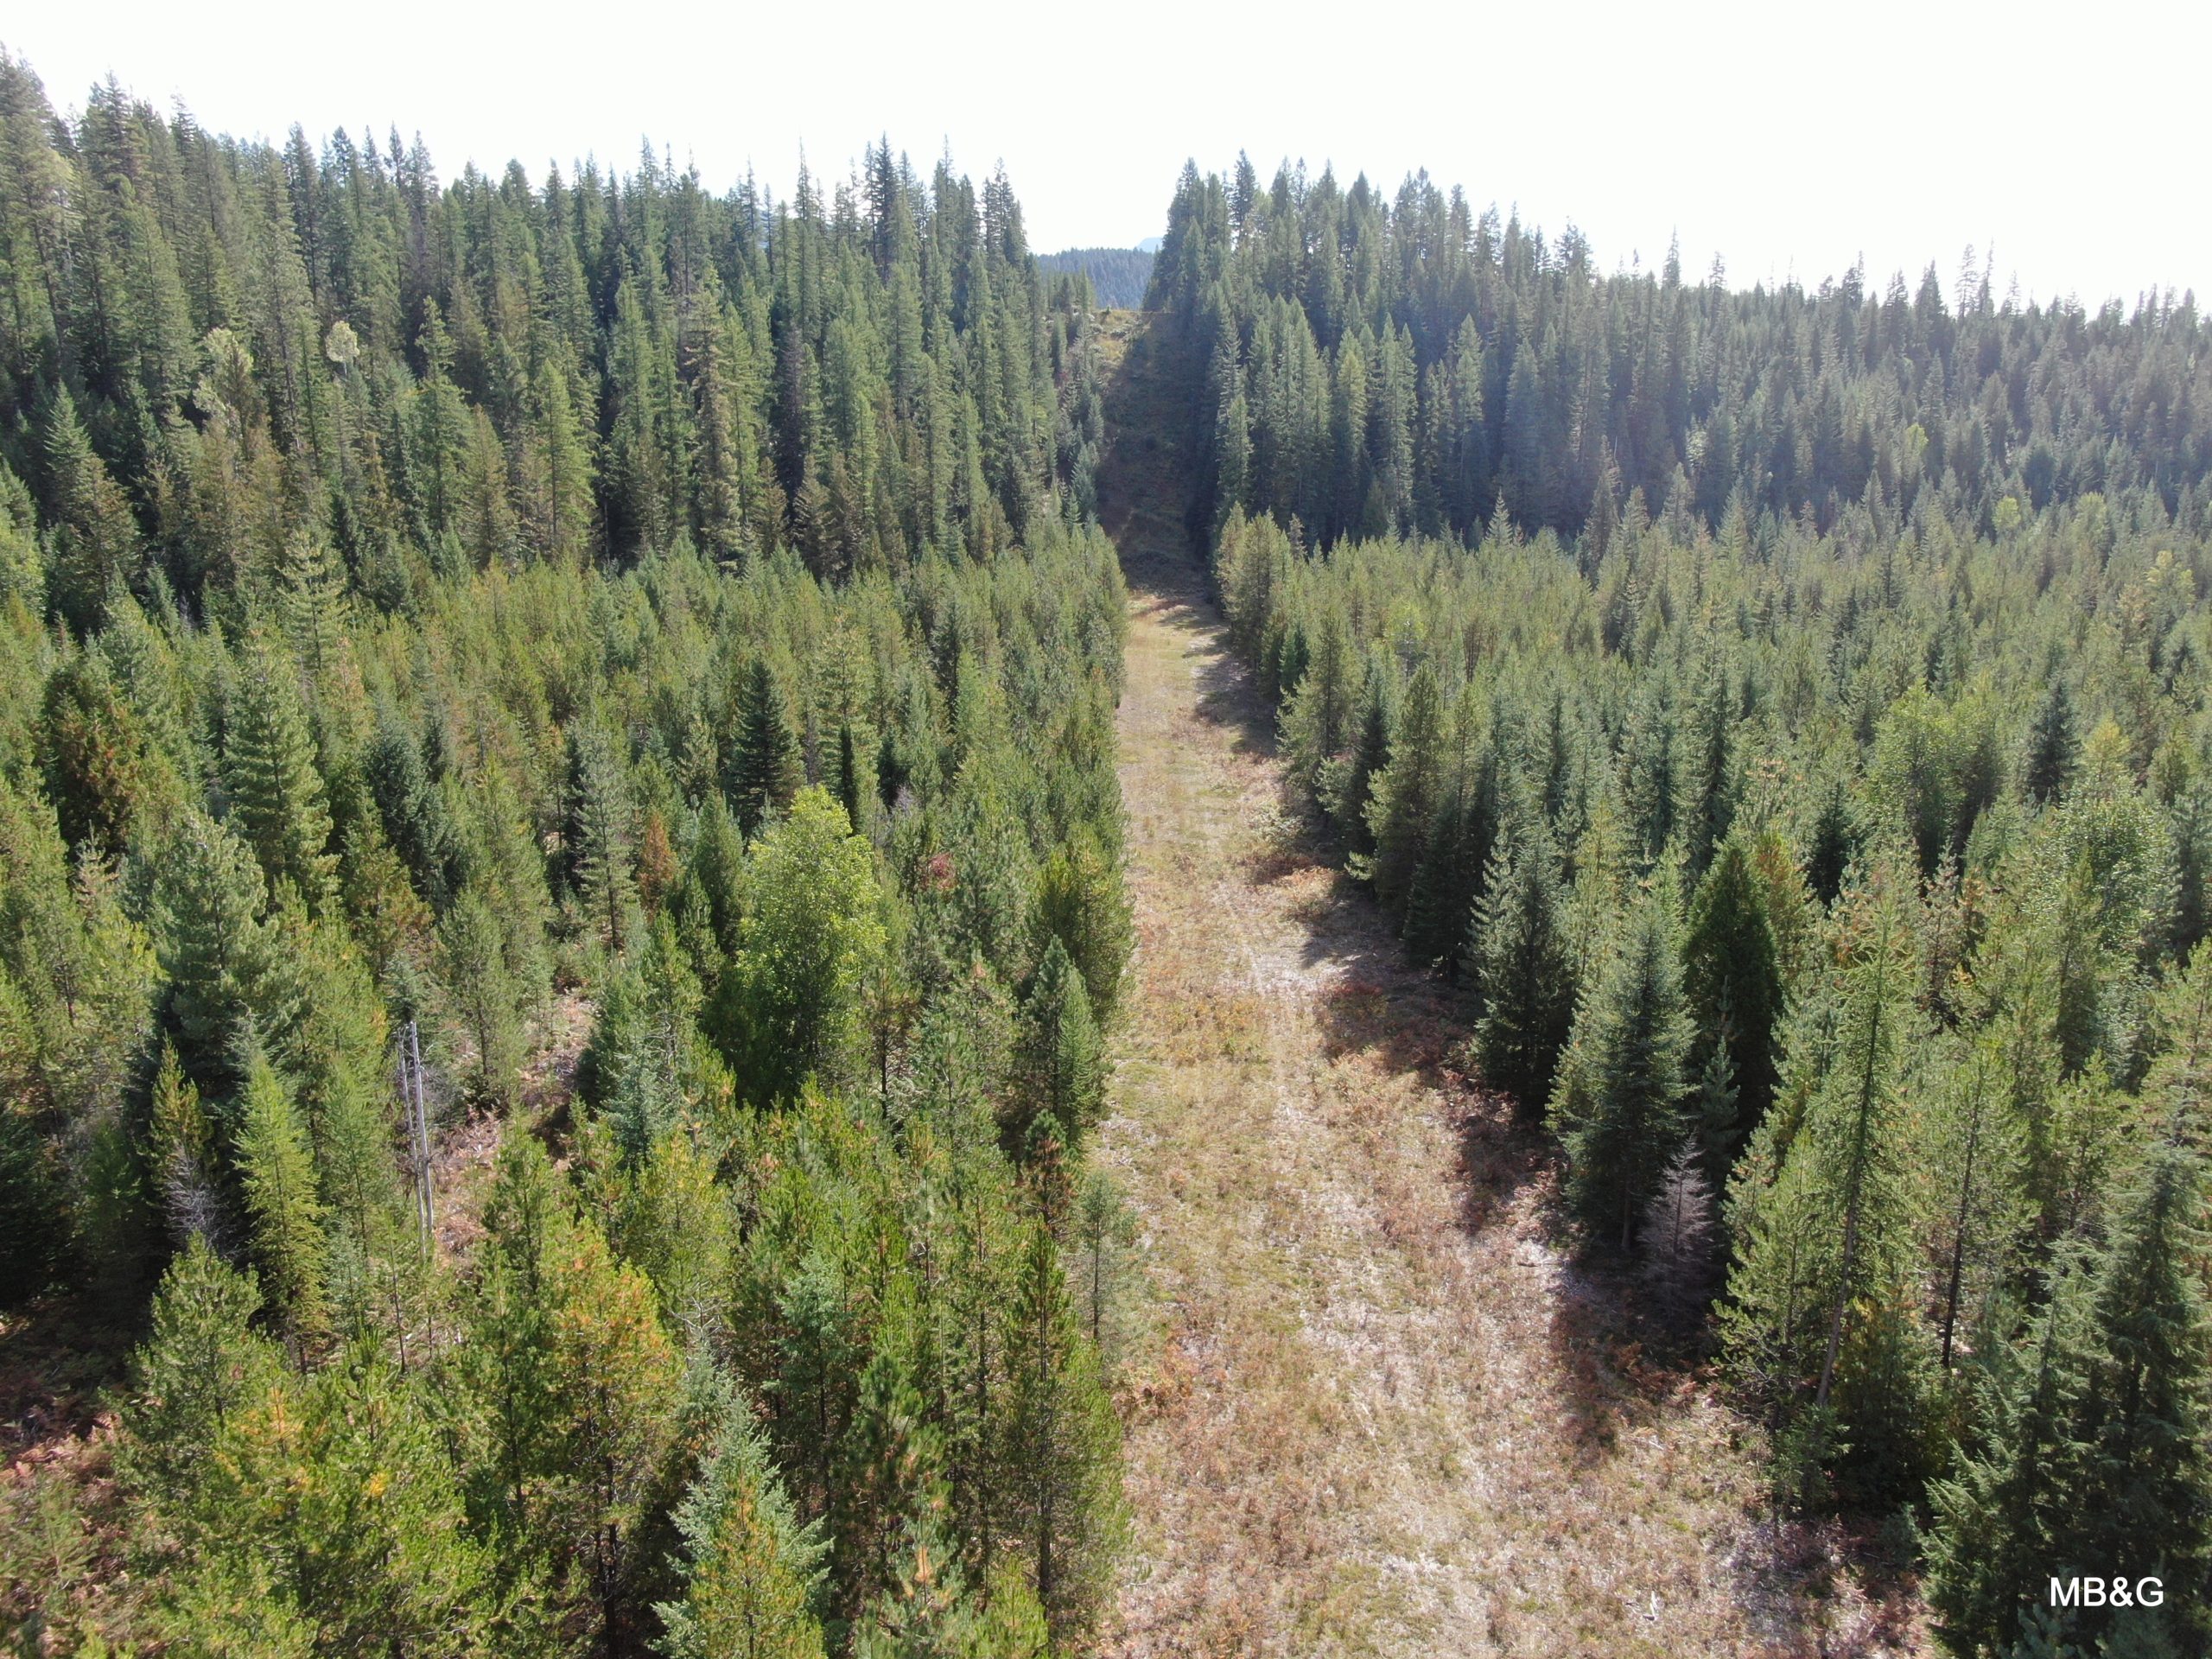 Semi-aerial color photo of evergreen forest with fire lane running up the center of the forest into the distance.